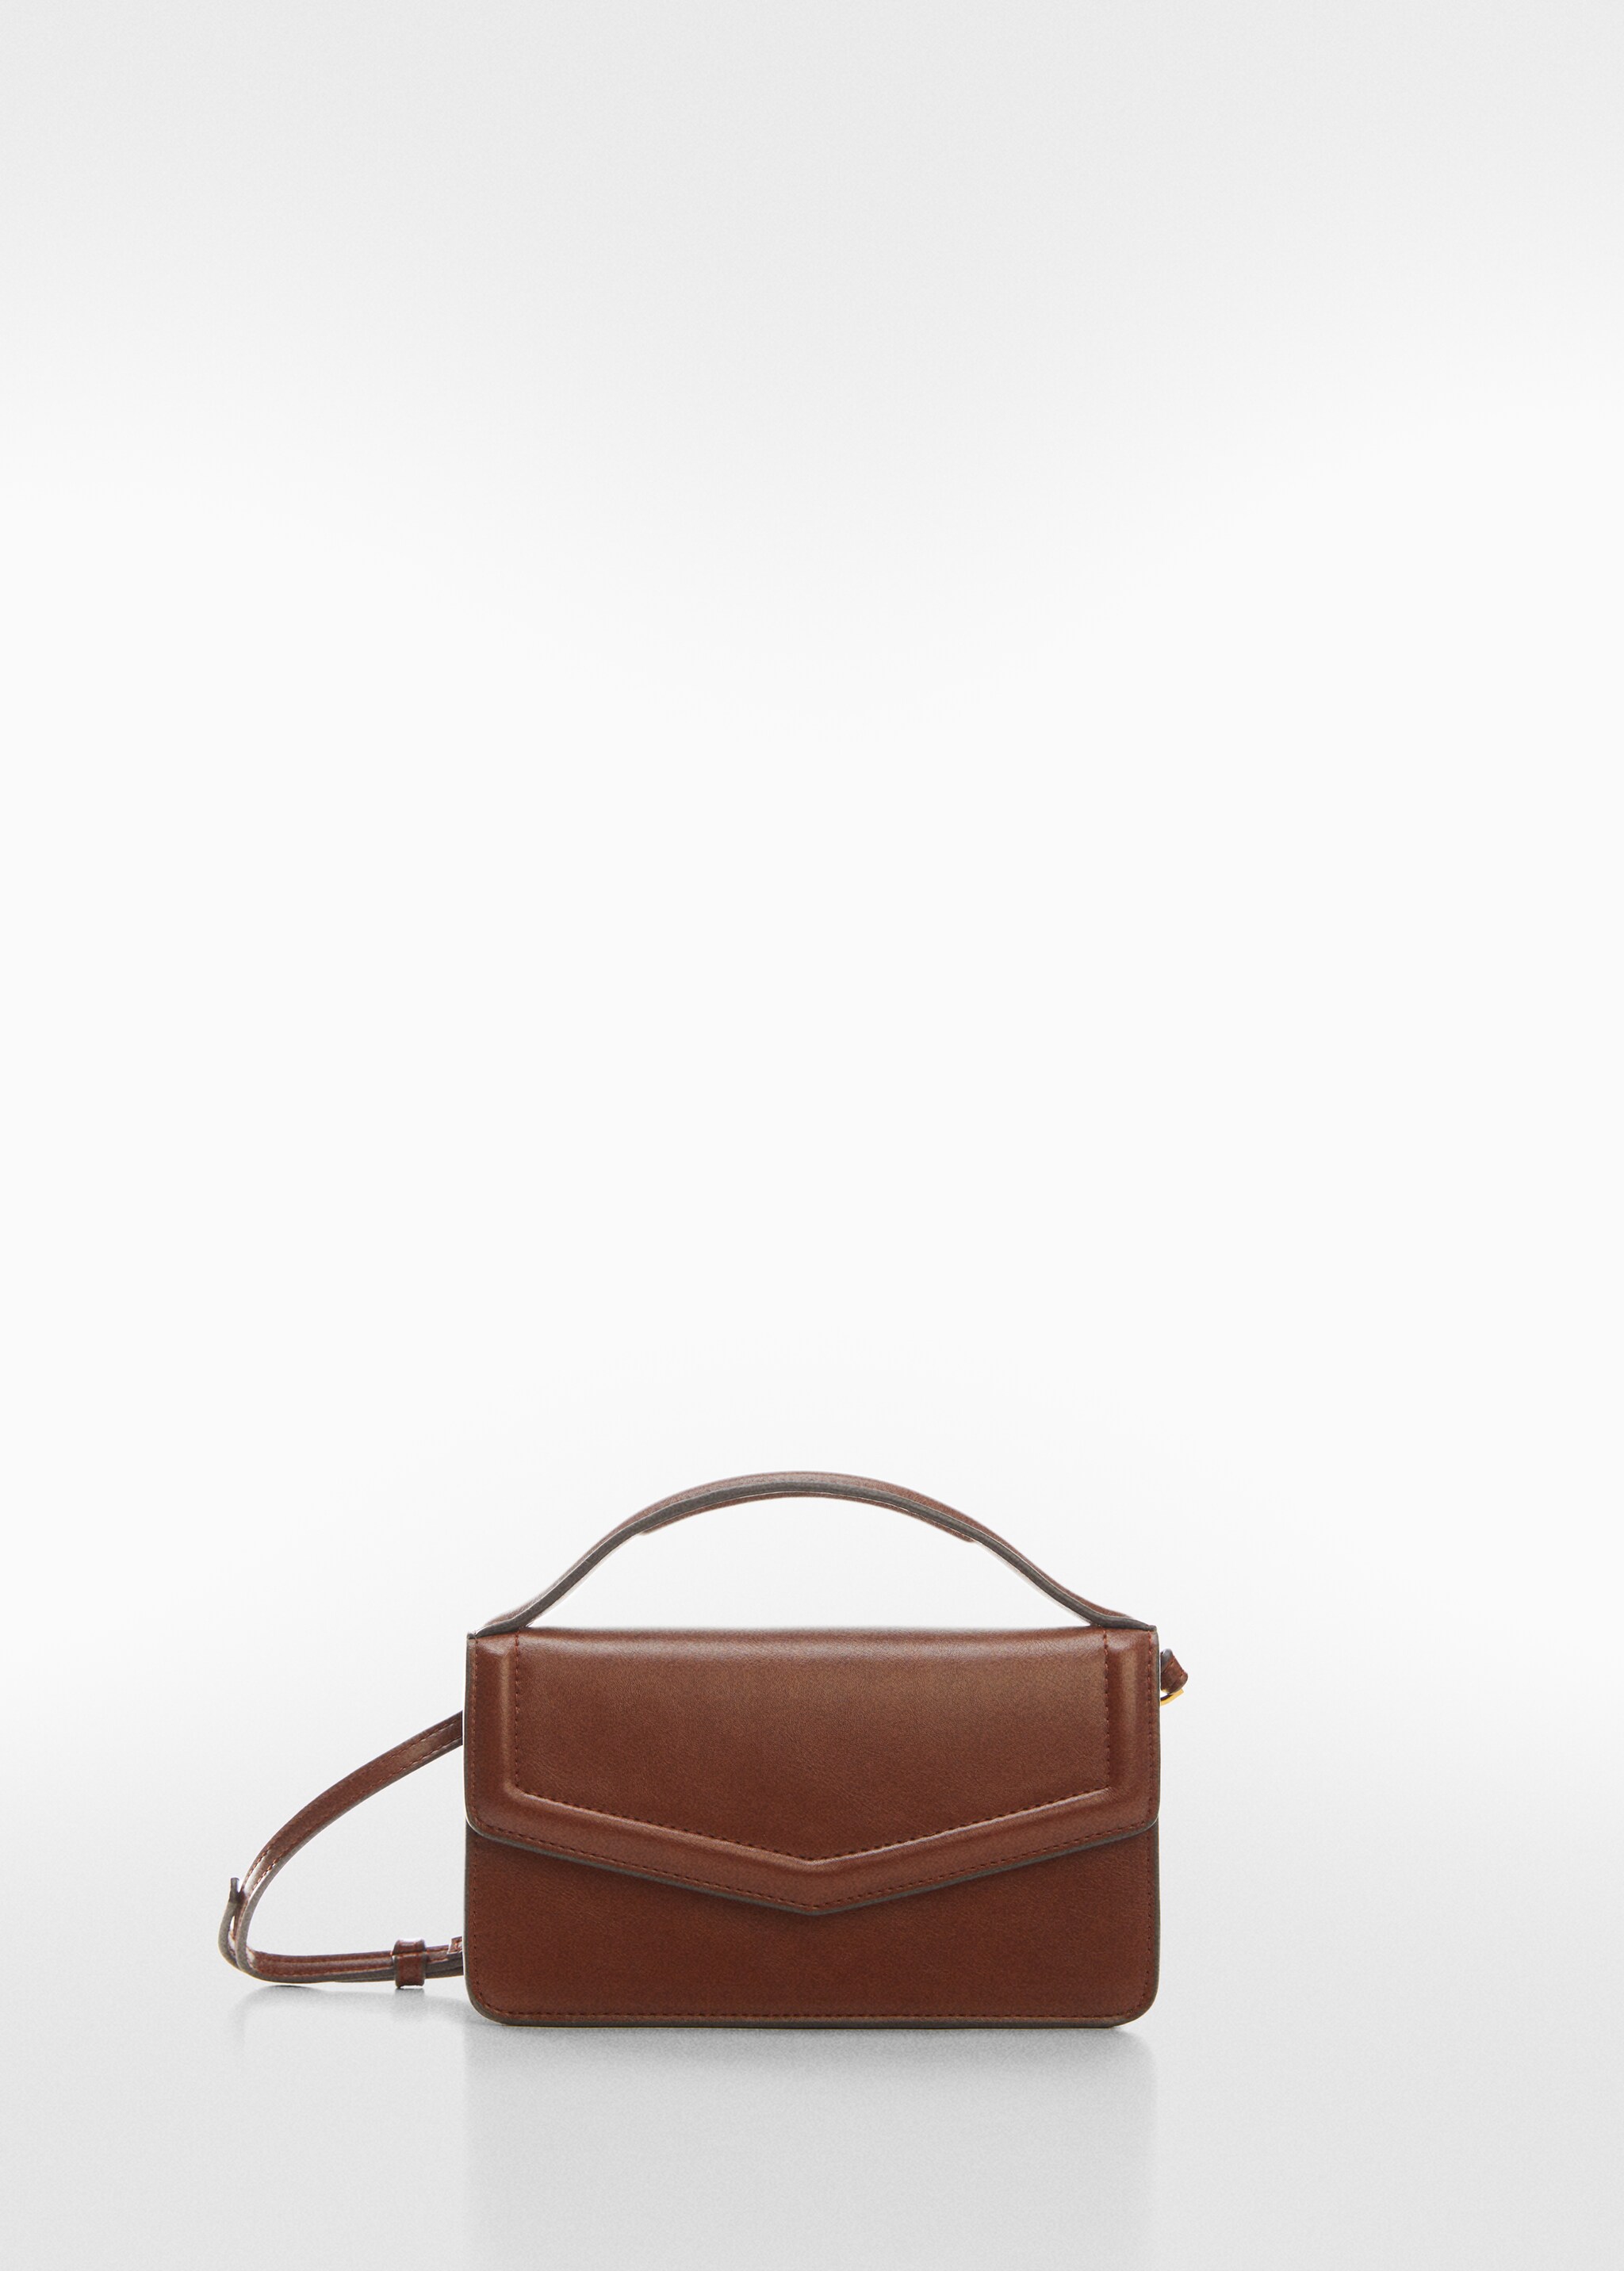 Rectangular bag with flap - Article without model